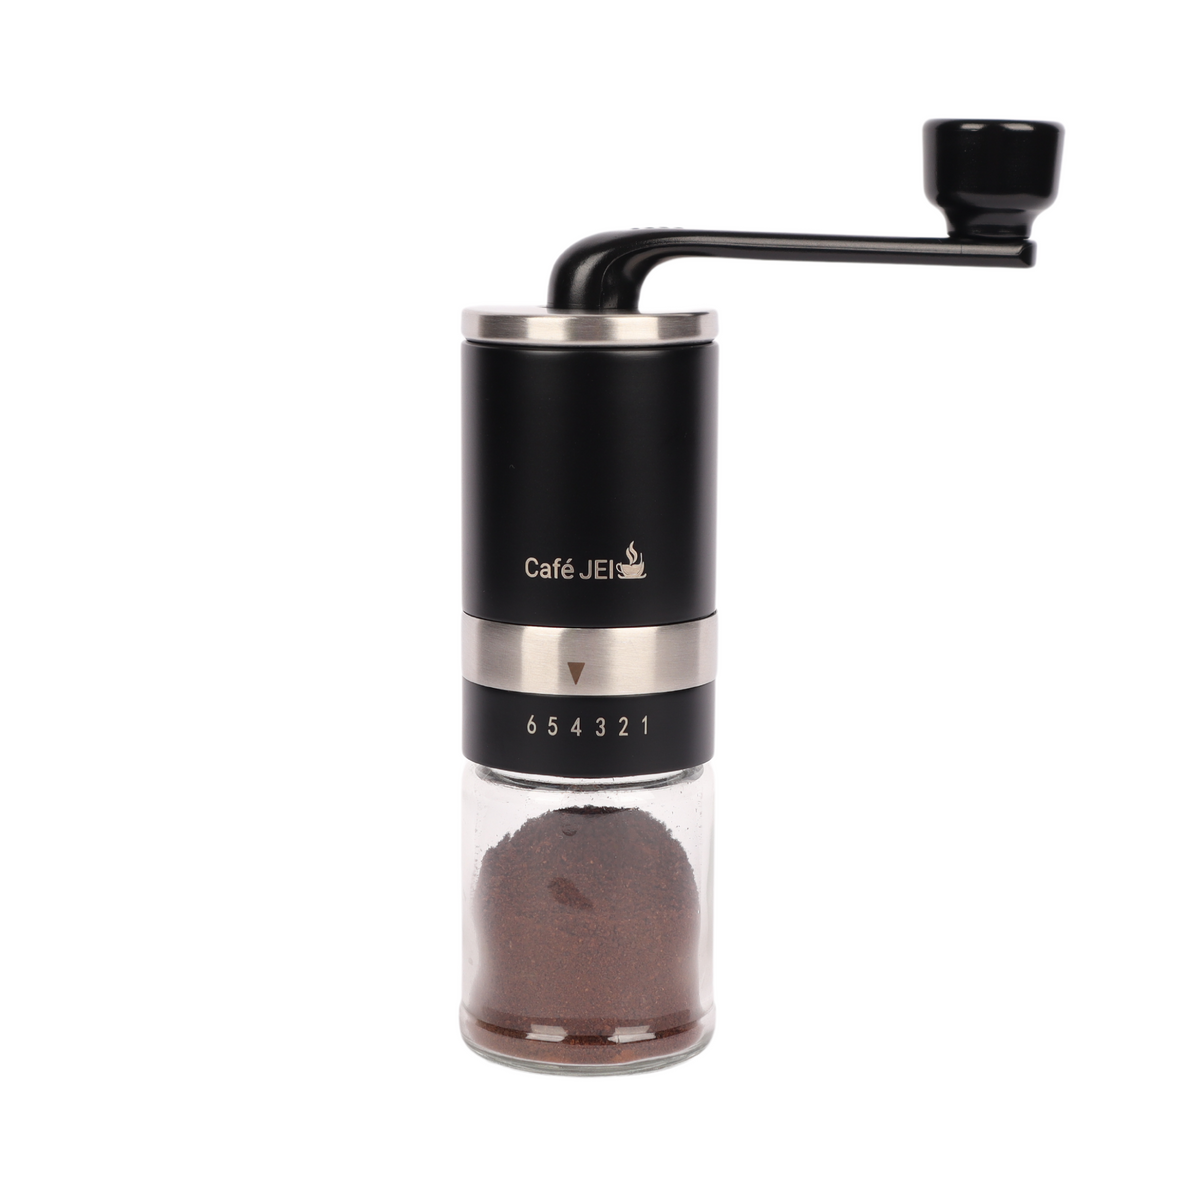 CafeSing Grizz Manual Coffee Grinder